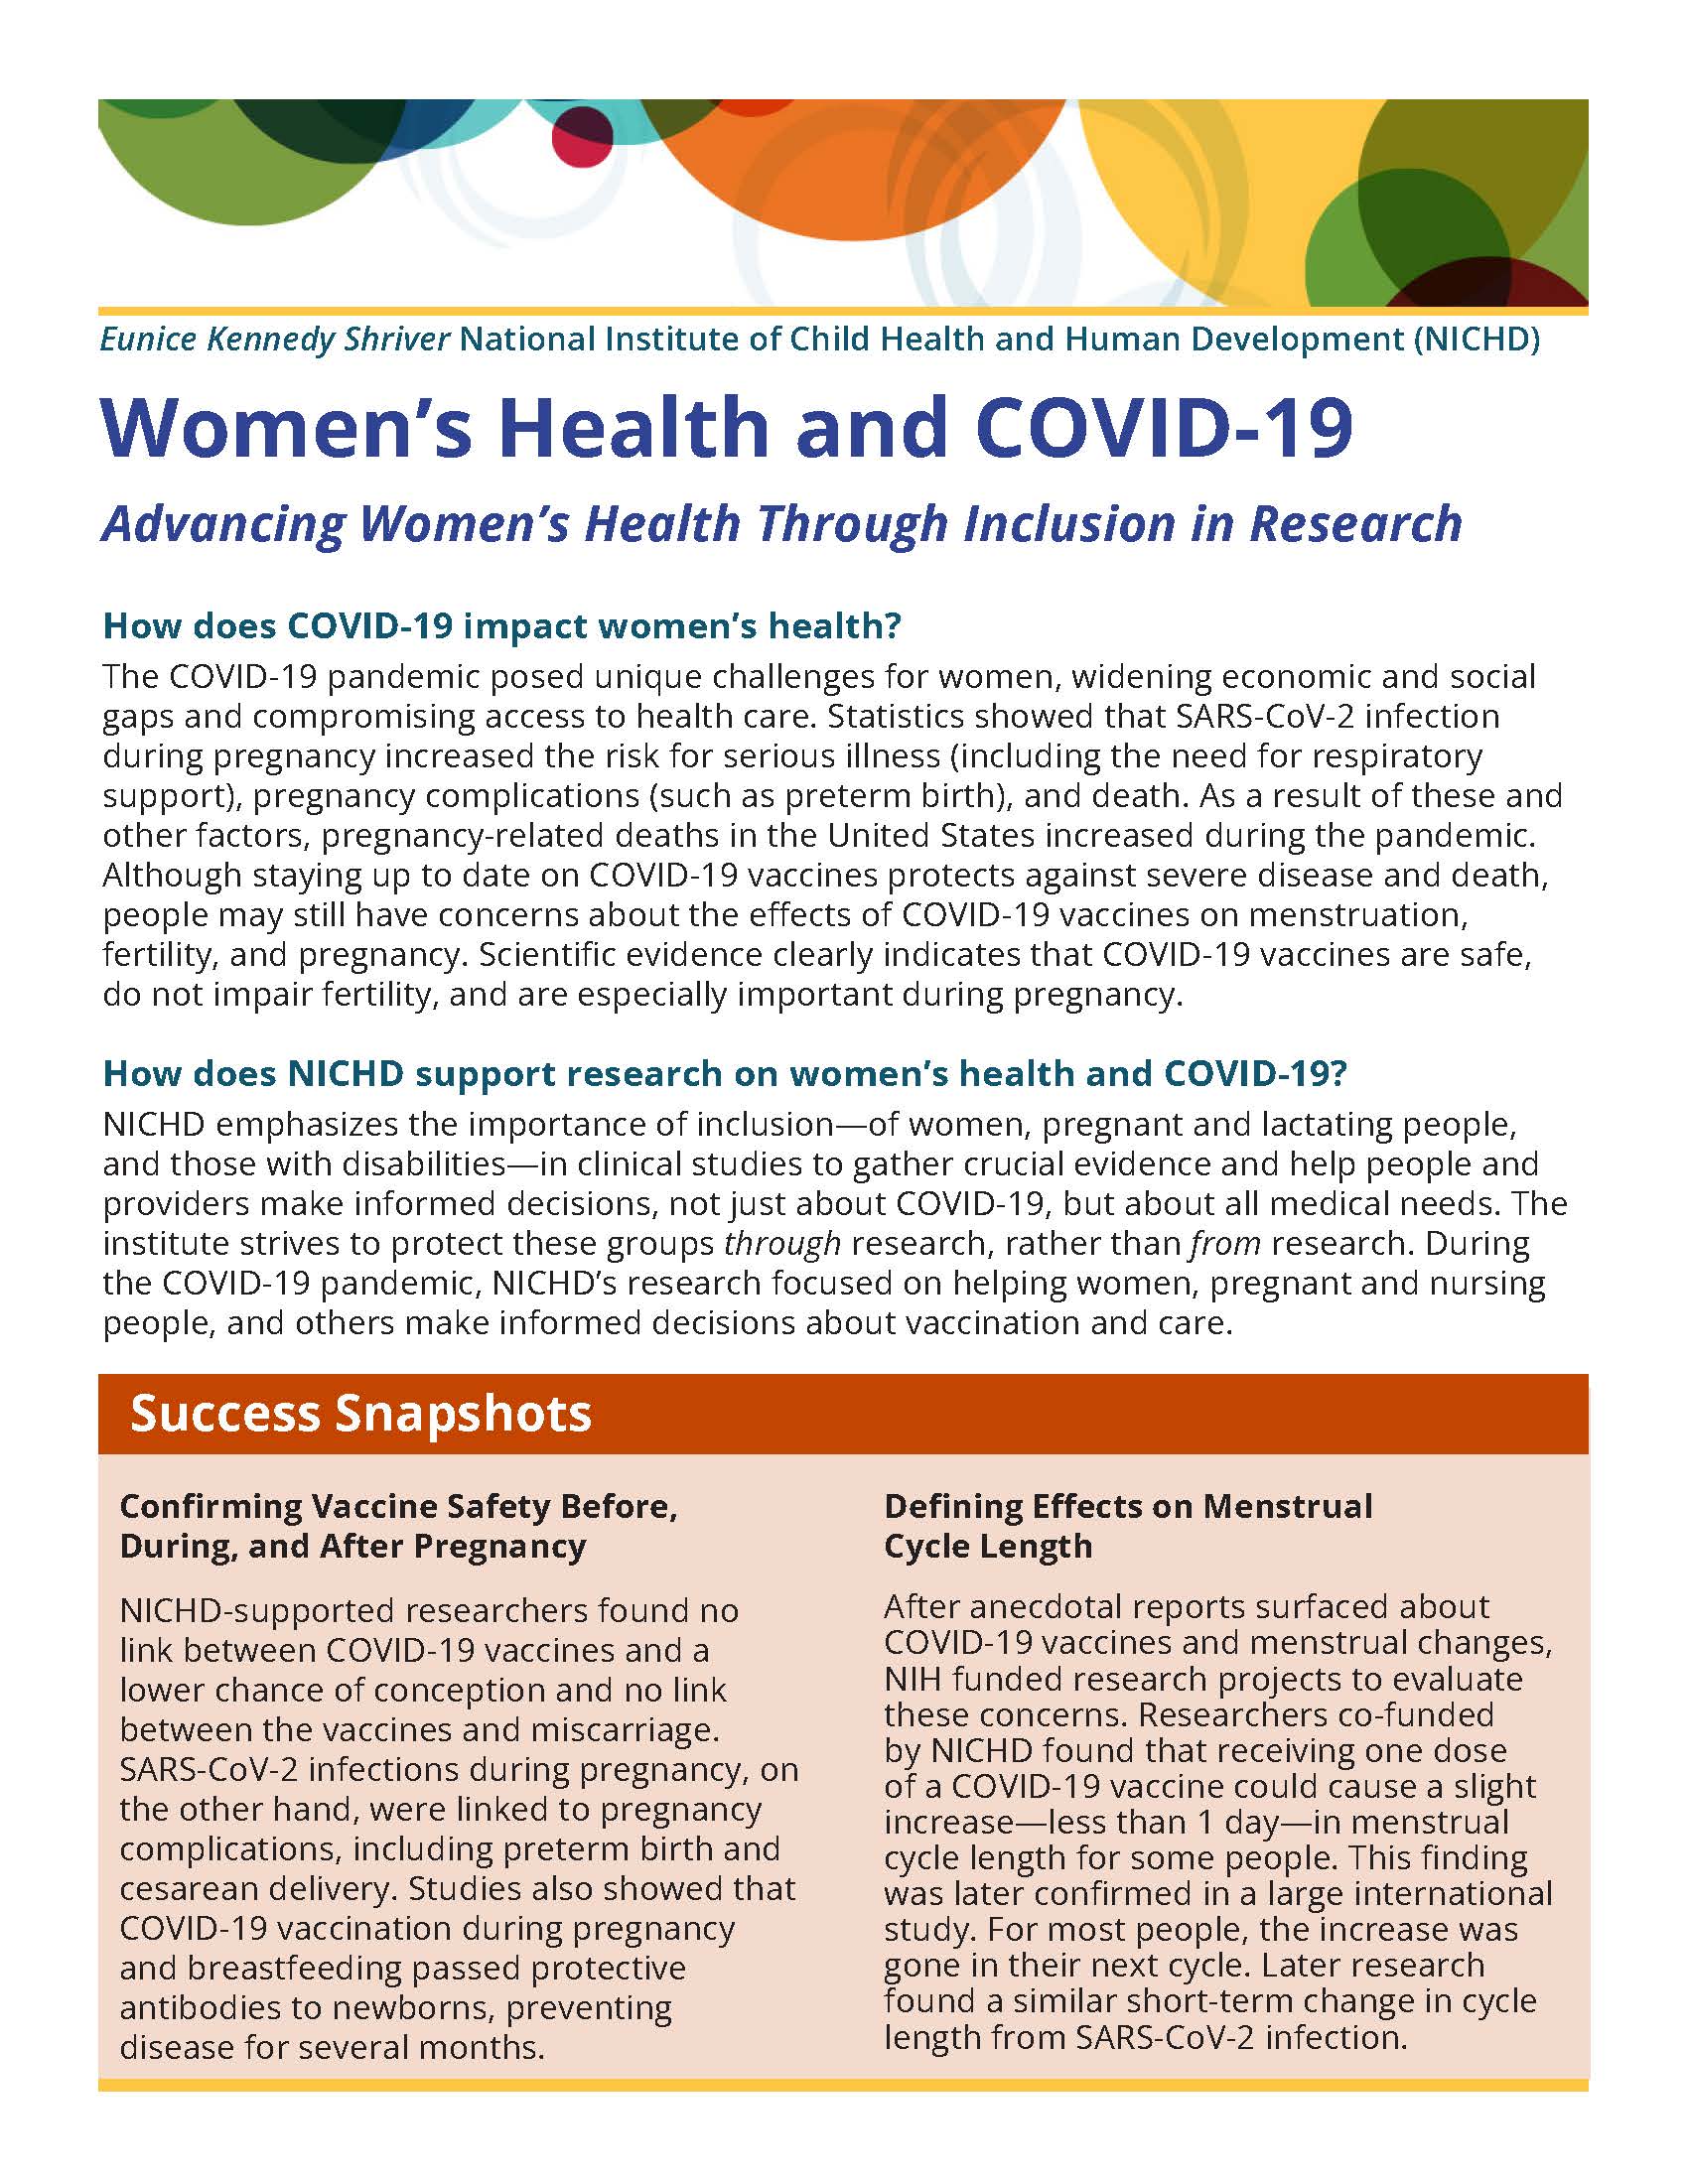 Front side of the NICHD "Women's Health and COVID-19" fact sheet